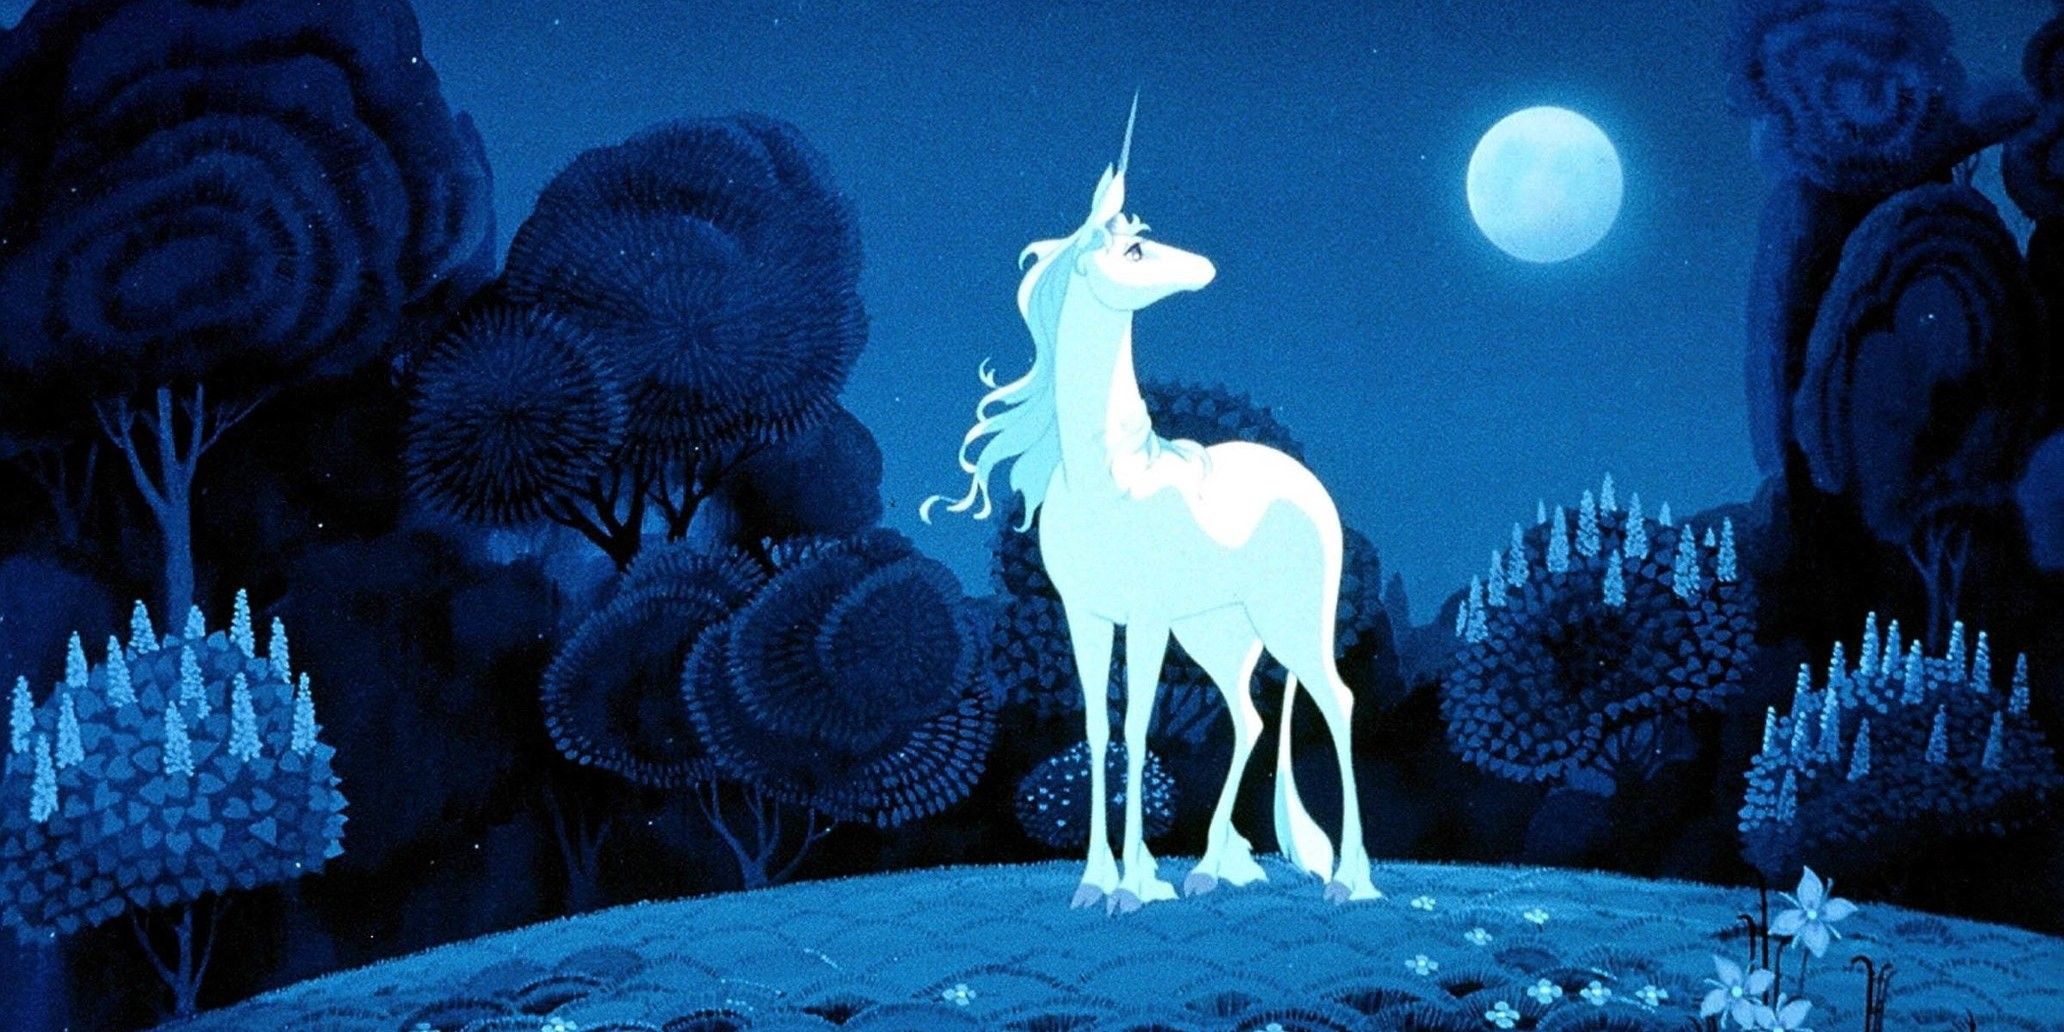 Image from the last unicorn.